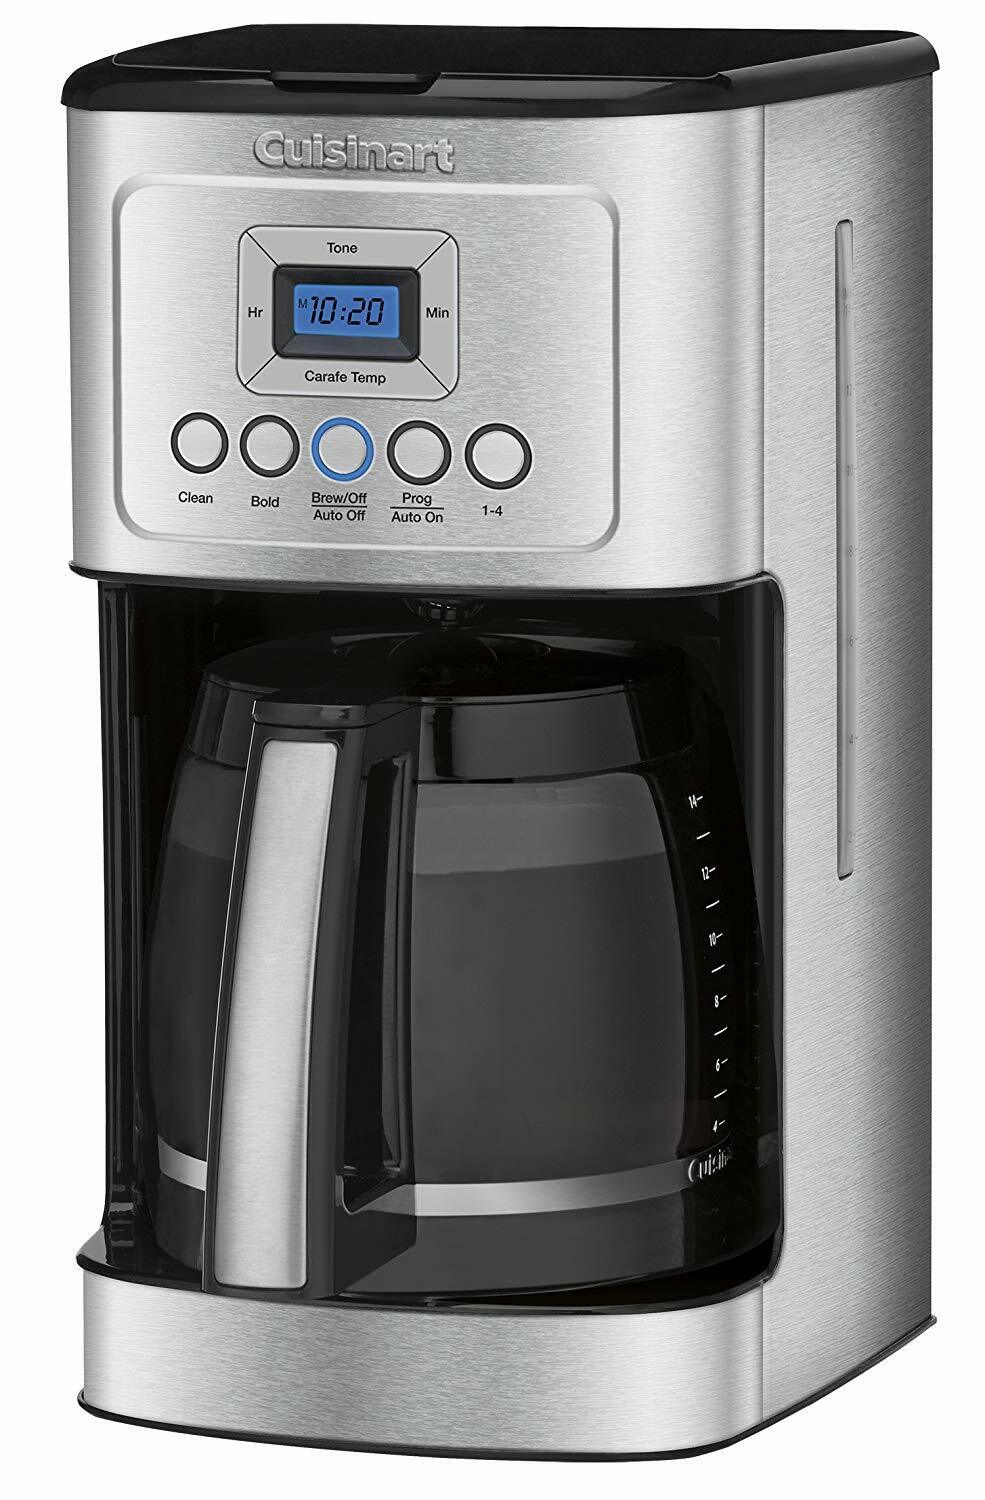 Cuisinart DCC-3200 14-Cup Programmable Drip Coffee Maker